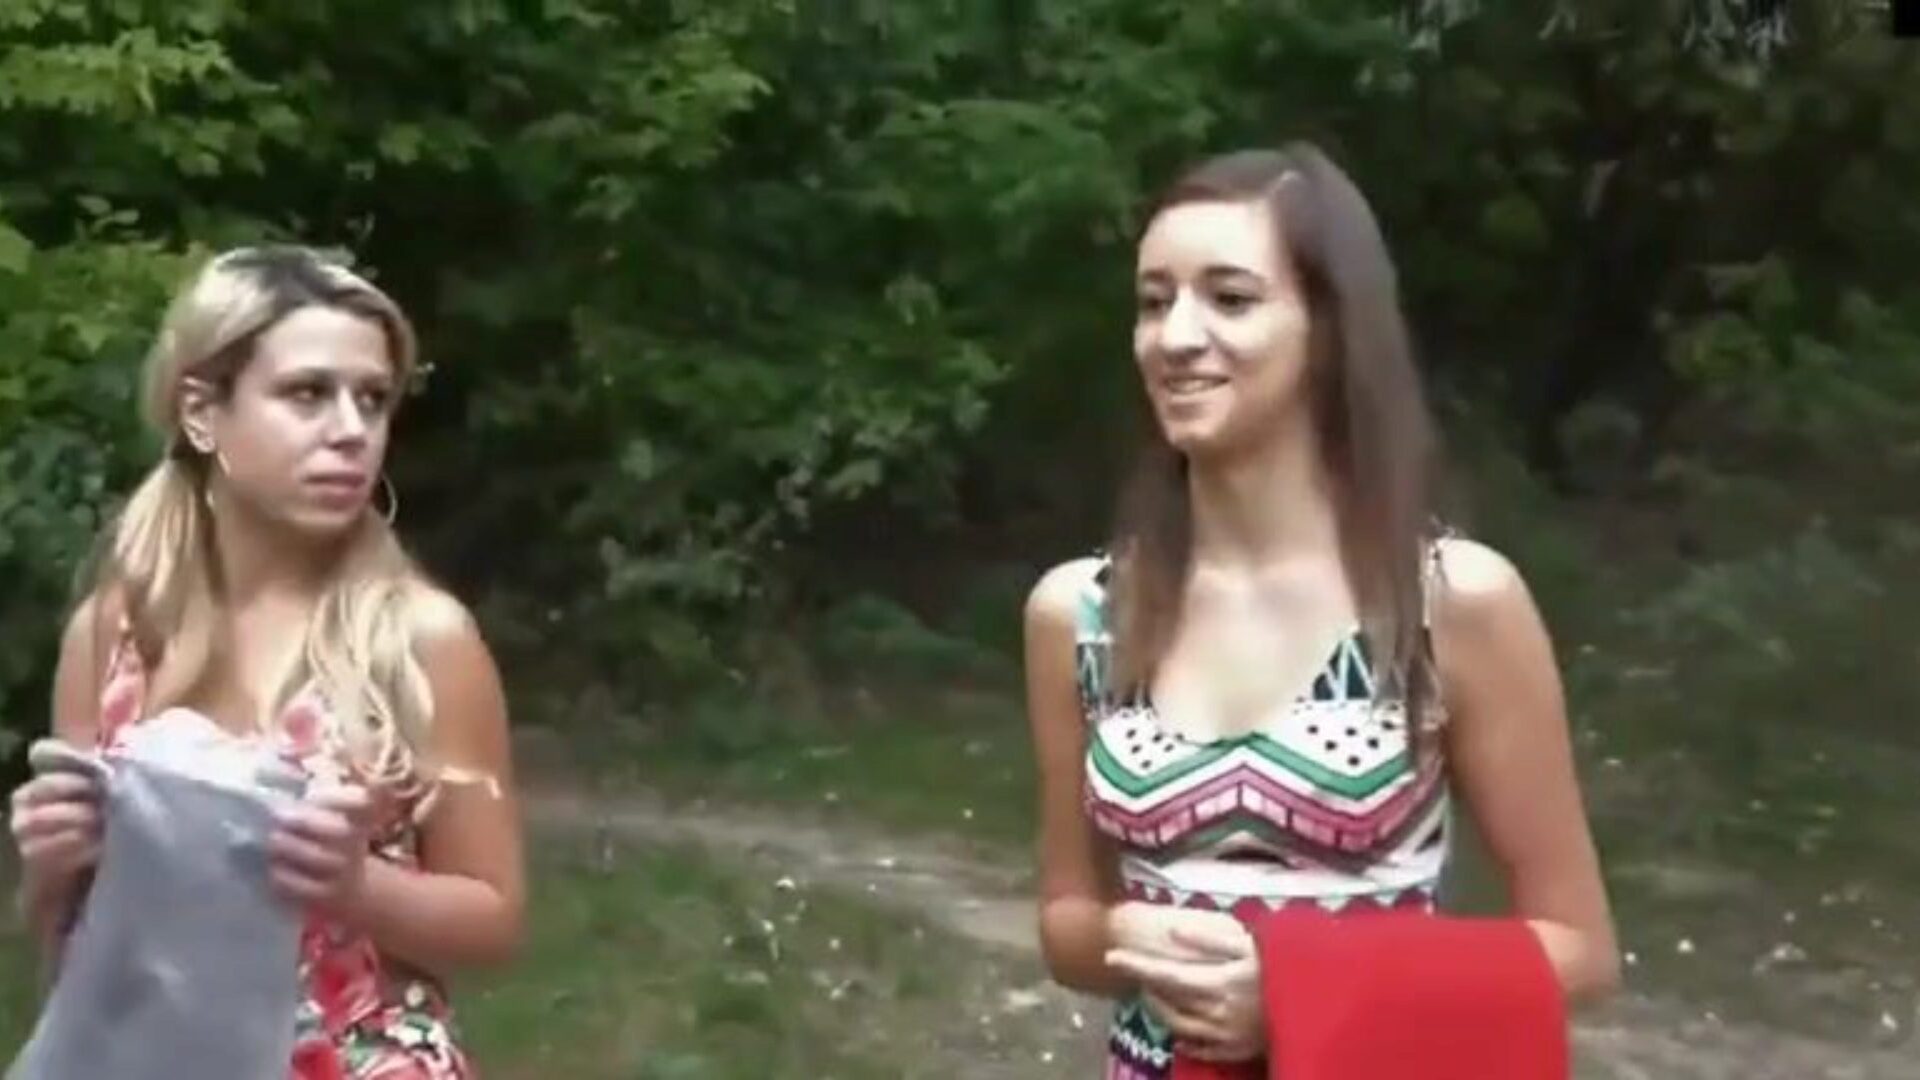 Mamma with Daughter Enjoying Anal Creampie Outdoor: Porn 27 See Mommy with Daughter Enjoying Anal Creampie Outdoor video on xHamster - the ultimate archive of free Mama Mobile Tube & Slutload HD pornography tube vids